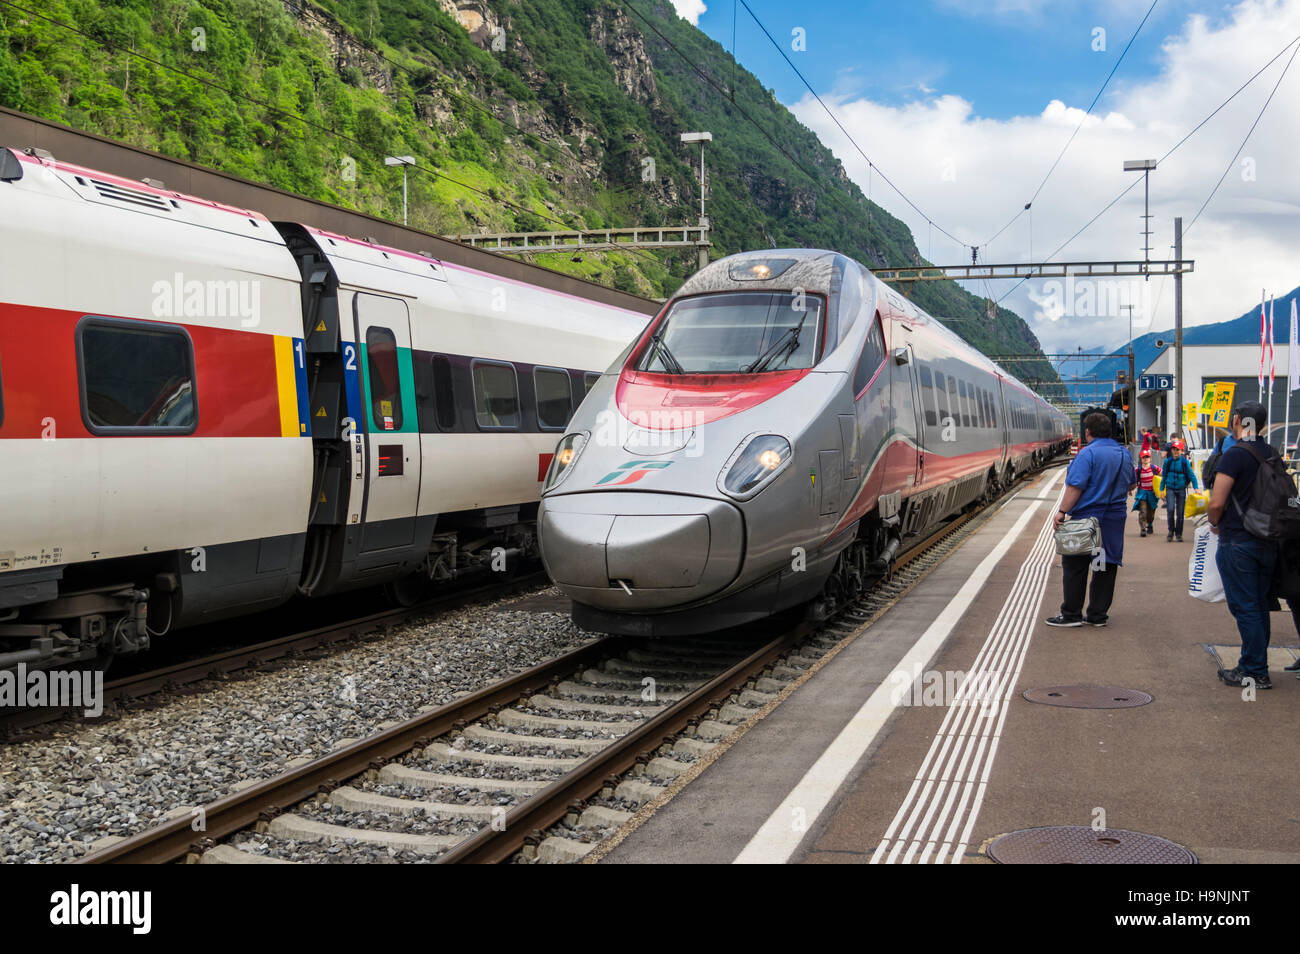 Alstom ETR 610 high-speed train operated by Trenitalia arriving at the train station of Biasca, Ticino, Switzerland. Stock Photo